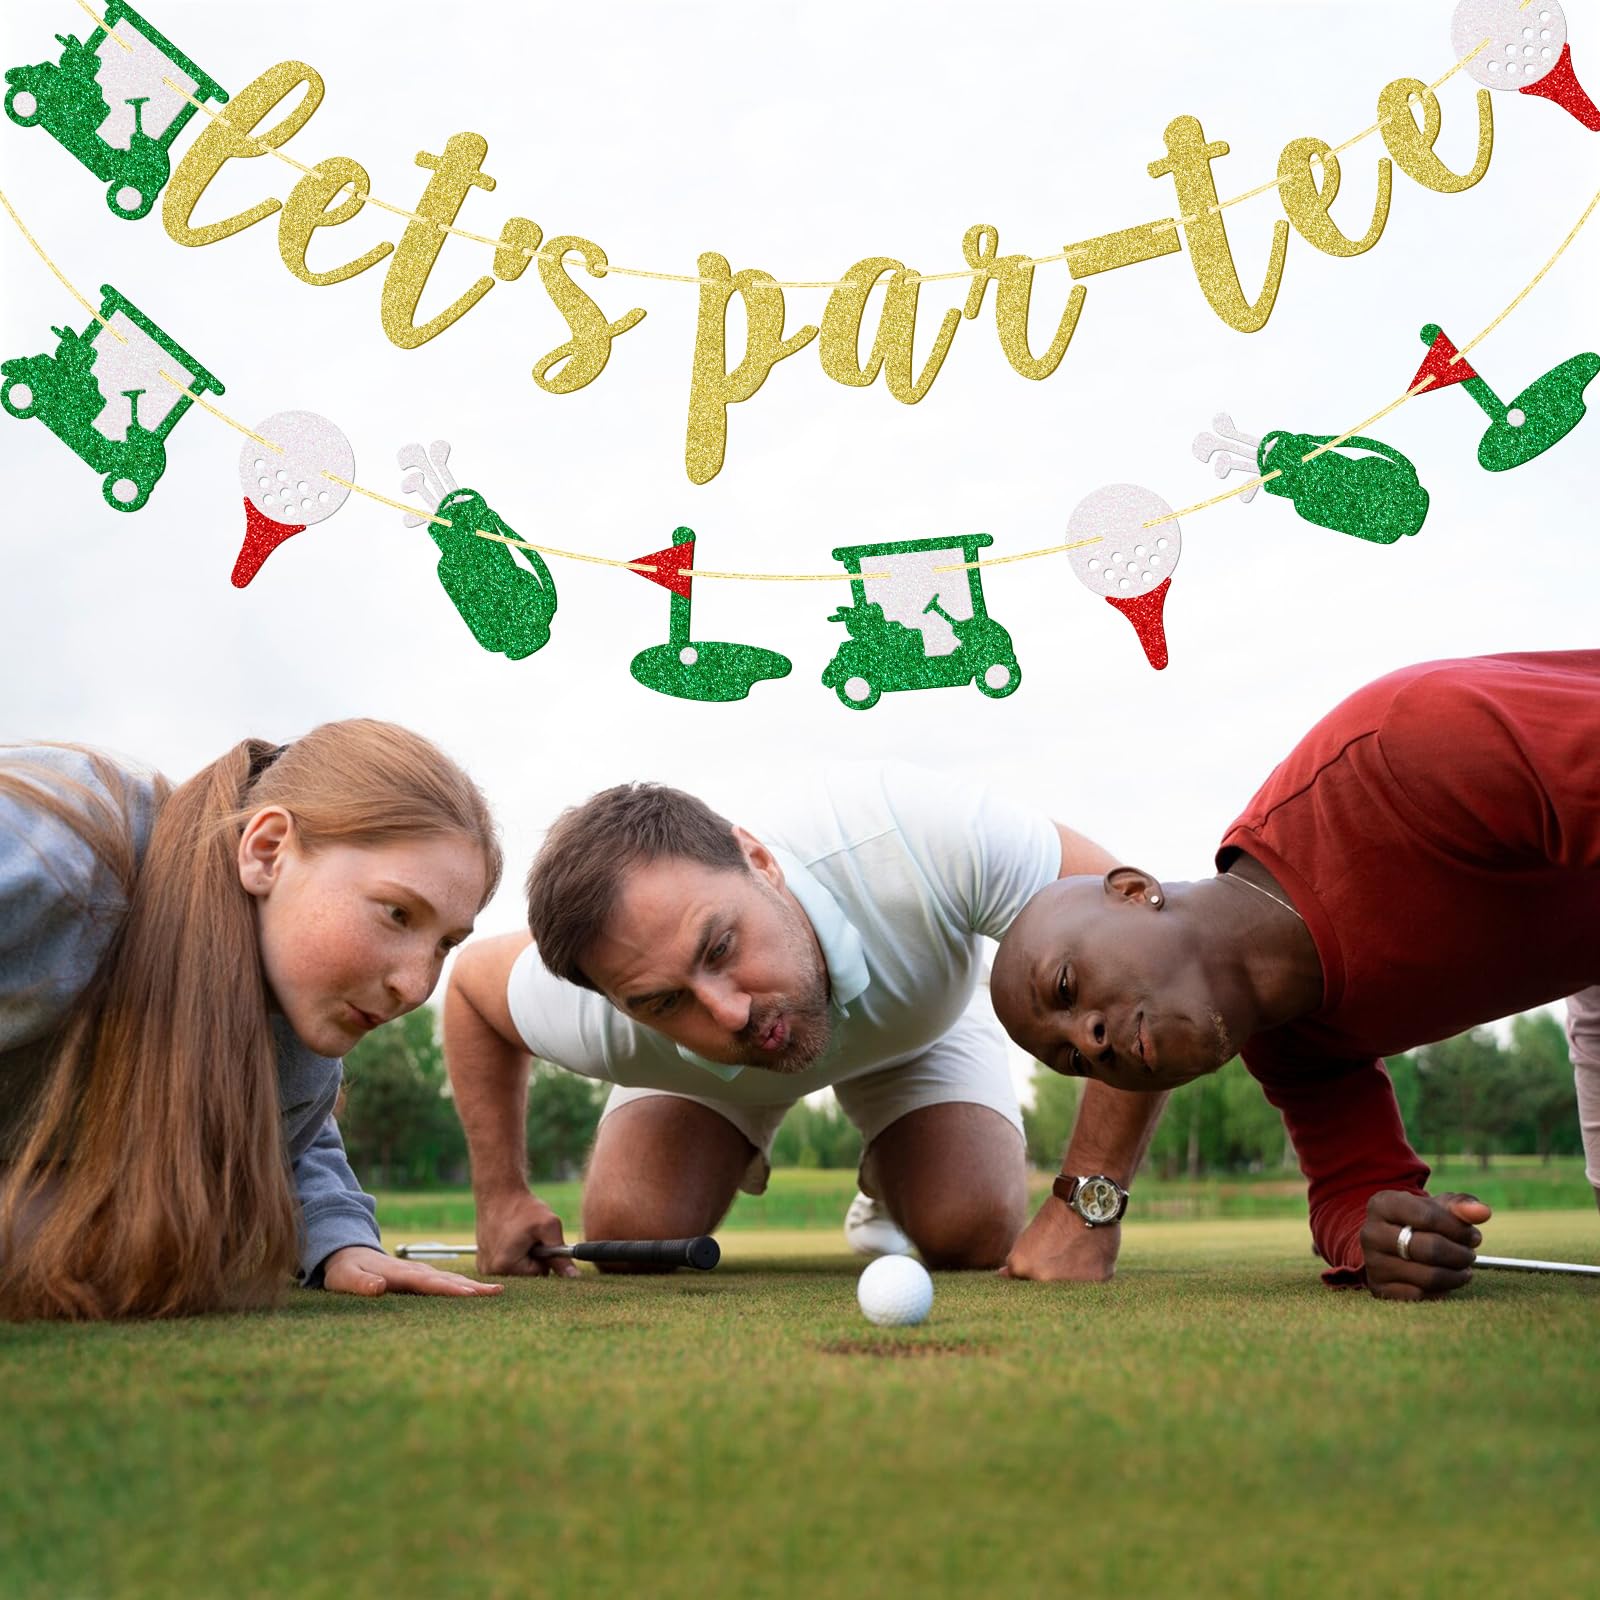 Let's Par-Tee Banner, Golf Themed Birthday Banner, Retirement Party Decor for Golf Lover, Golf Party Decorations, Gold Glitter